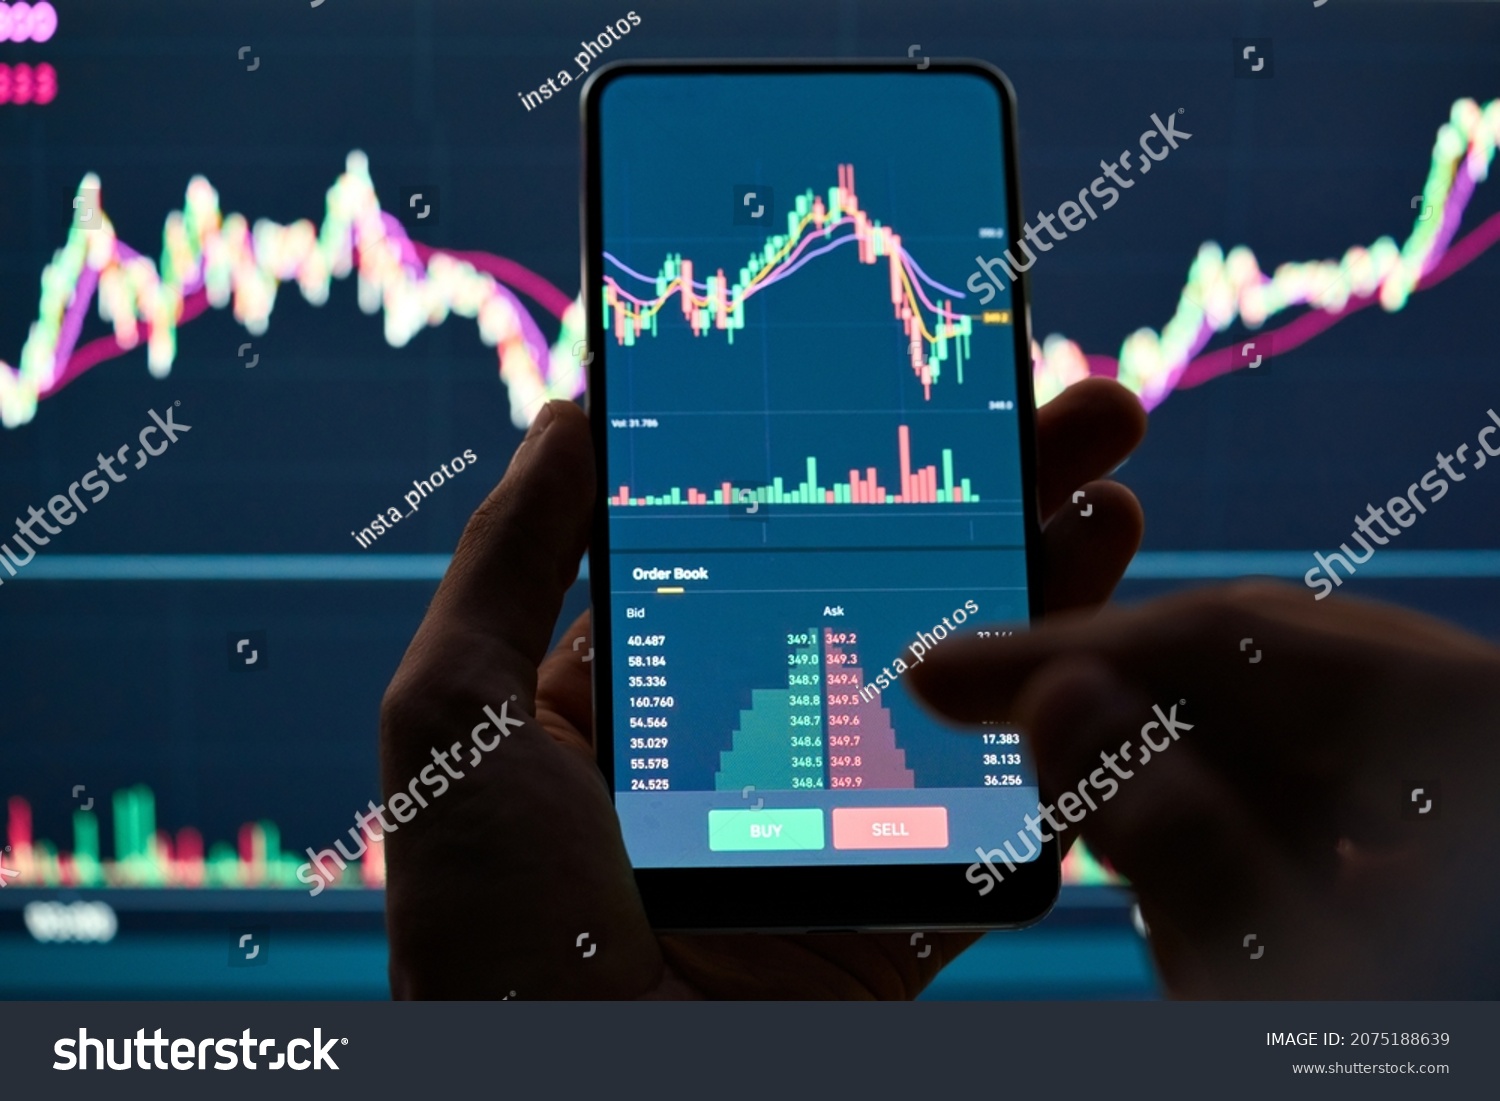 Crypto trader investor broker holding finger using cell phone app executing financial stock trade market trading order to buy or sell cryptocurrency shares thinking of investment risks profit concept. #2075188639